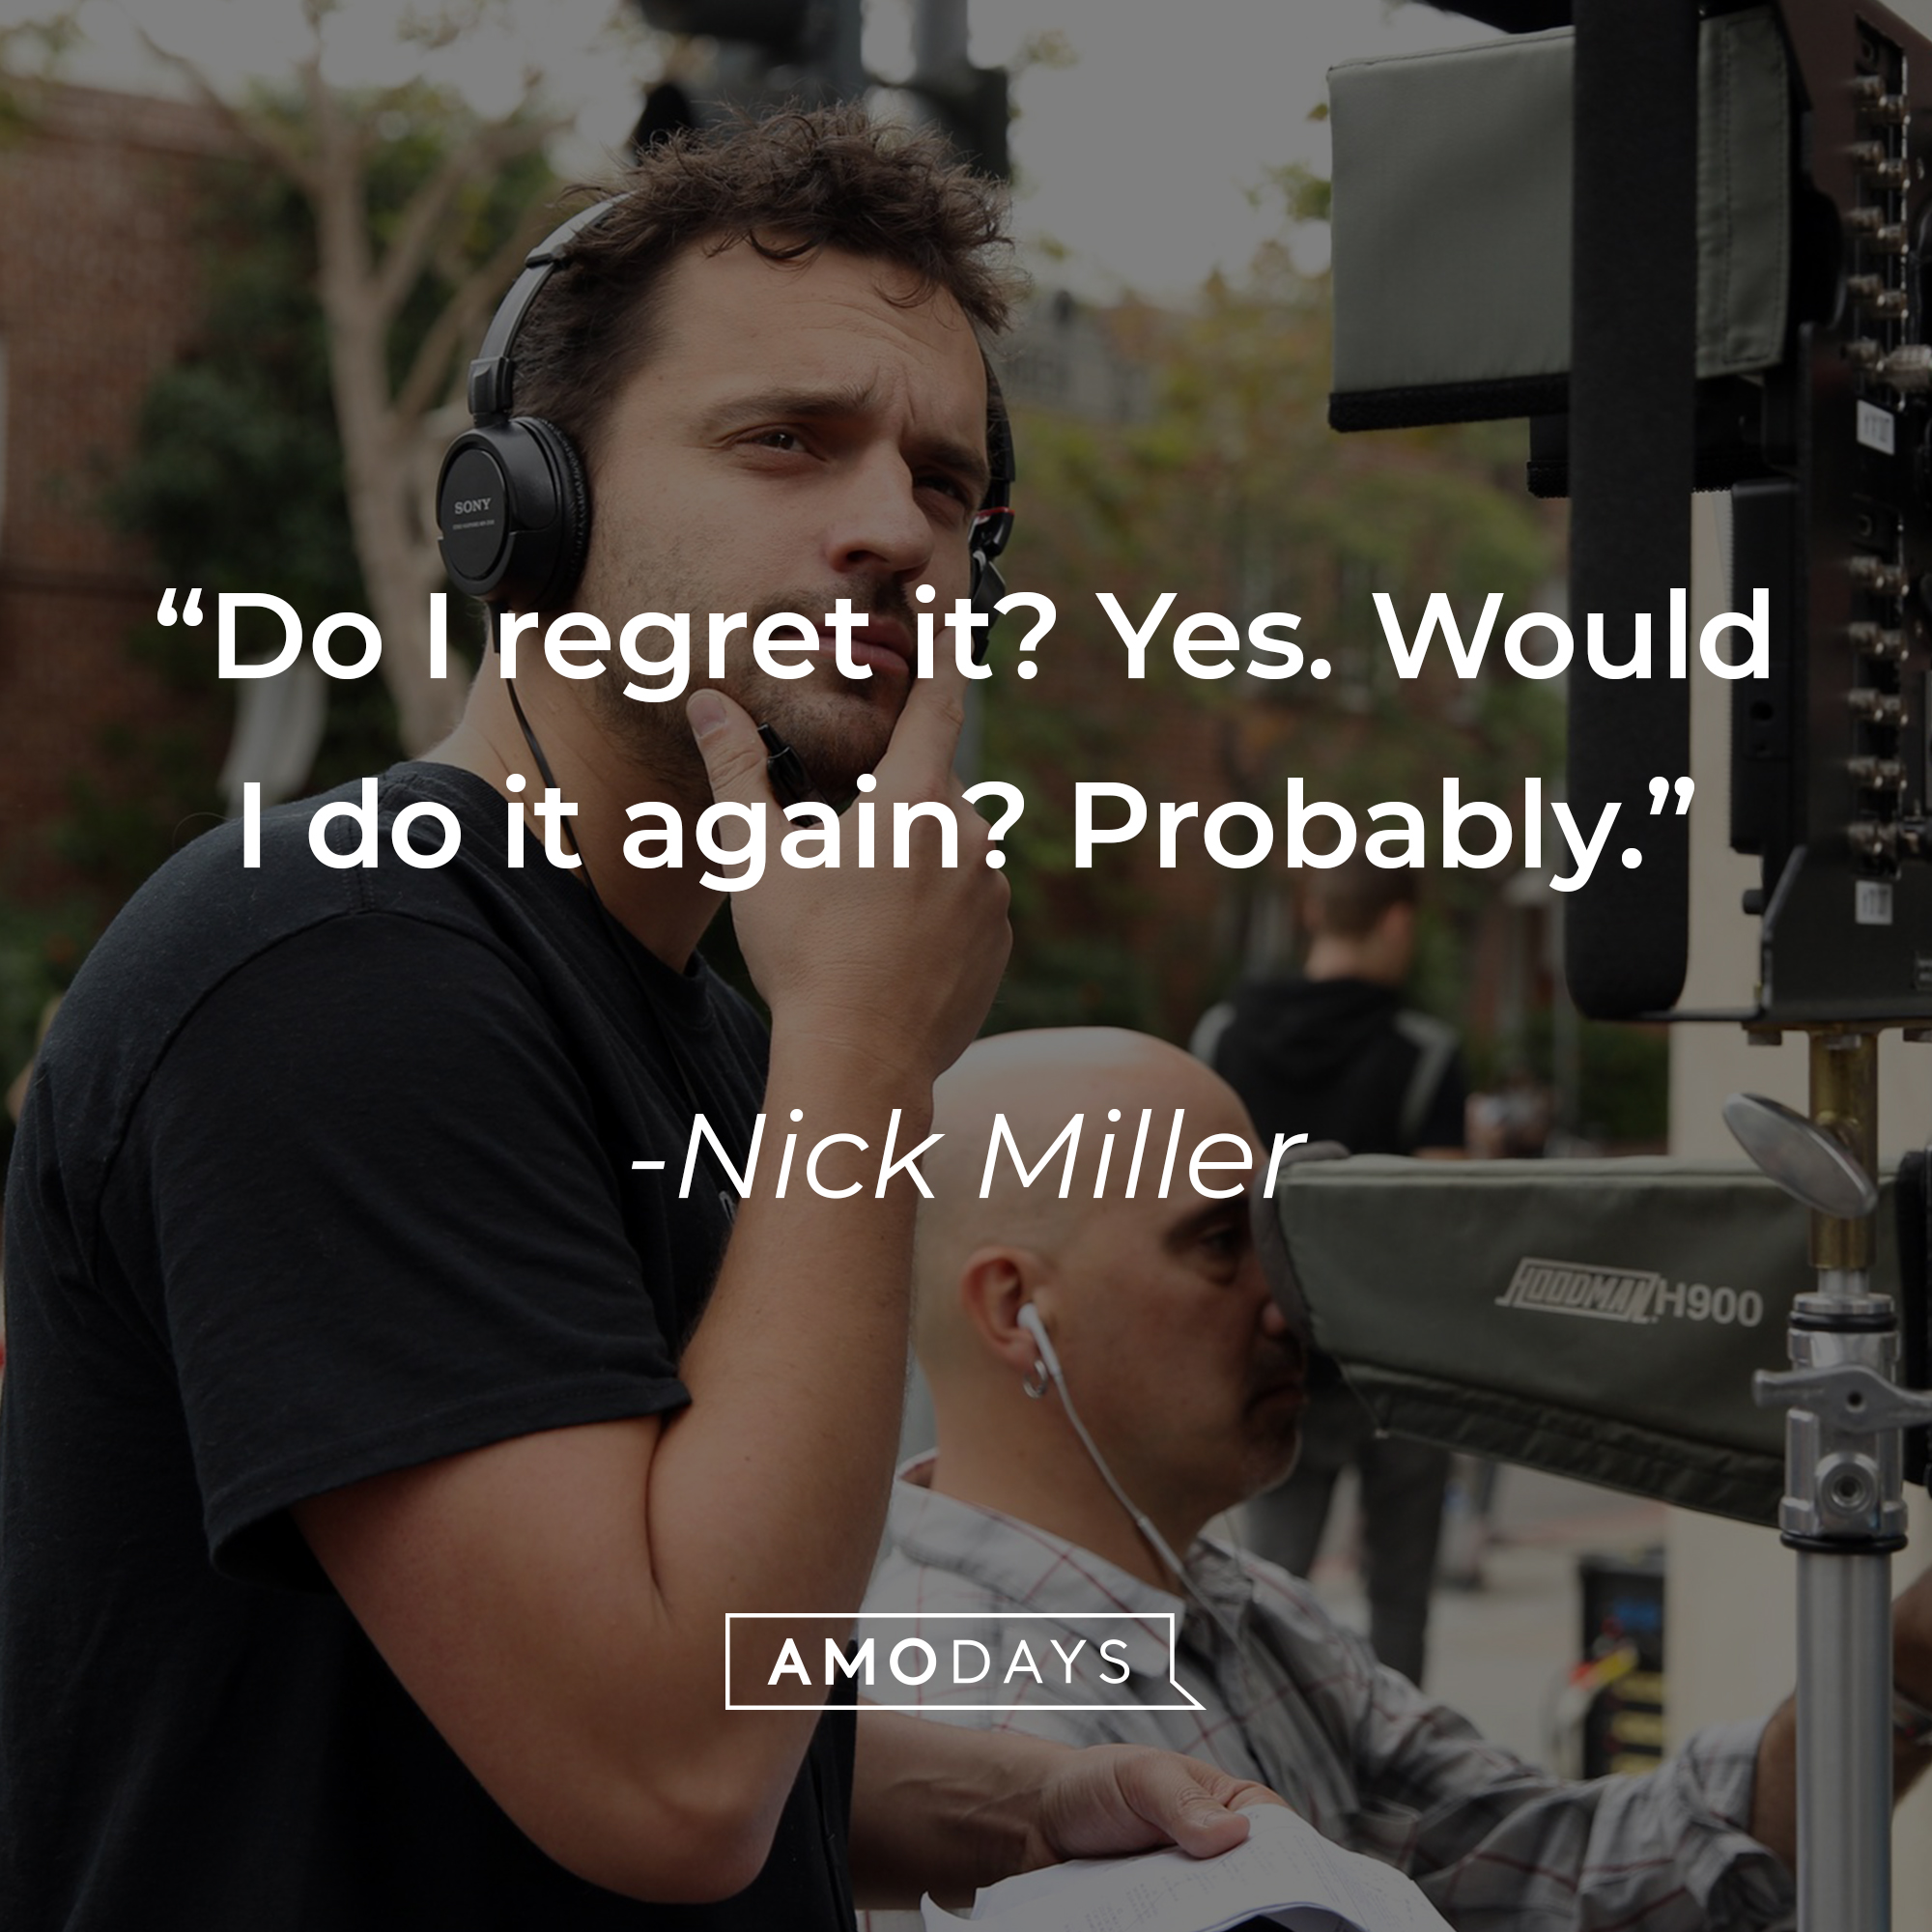 Nick Miller, with his quote: “Do I regret it? Yes. Would I do it again? Probably.” | Source: facebook.com/OfficialNewGirl